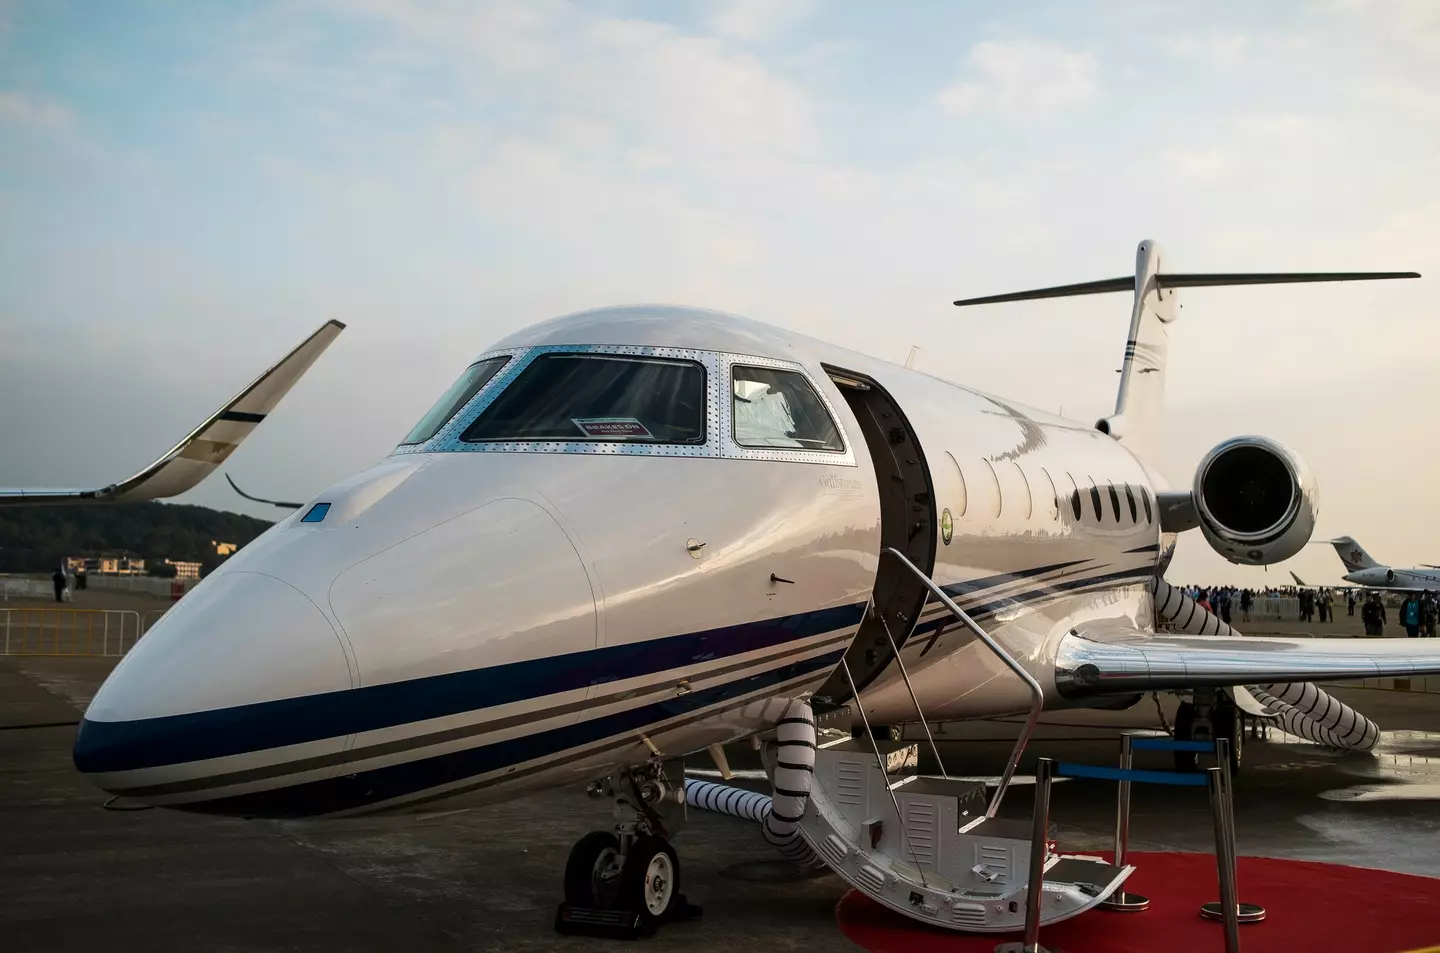 An G650ER aircraft by Gulfstream Aerospace Corporation on display at the China International Aviation & Aerospace Exhibition in 2016.